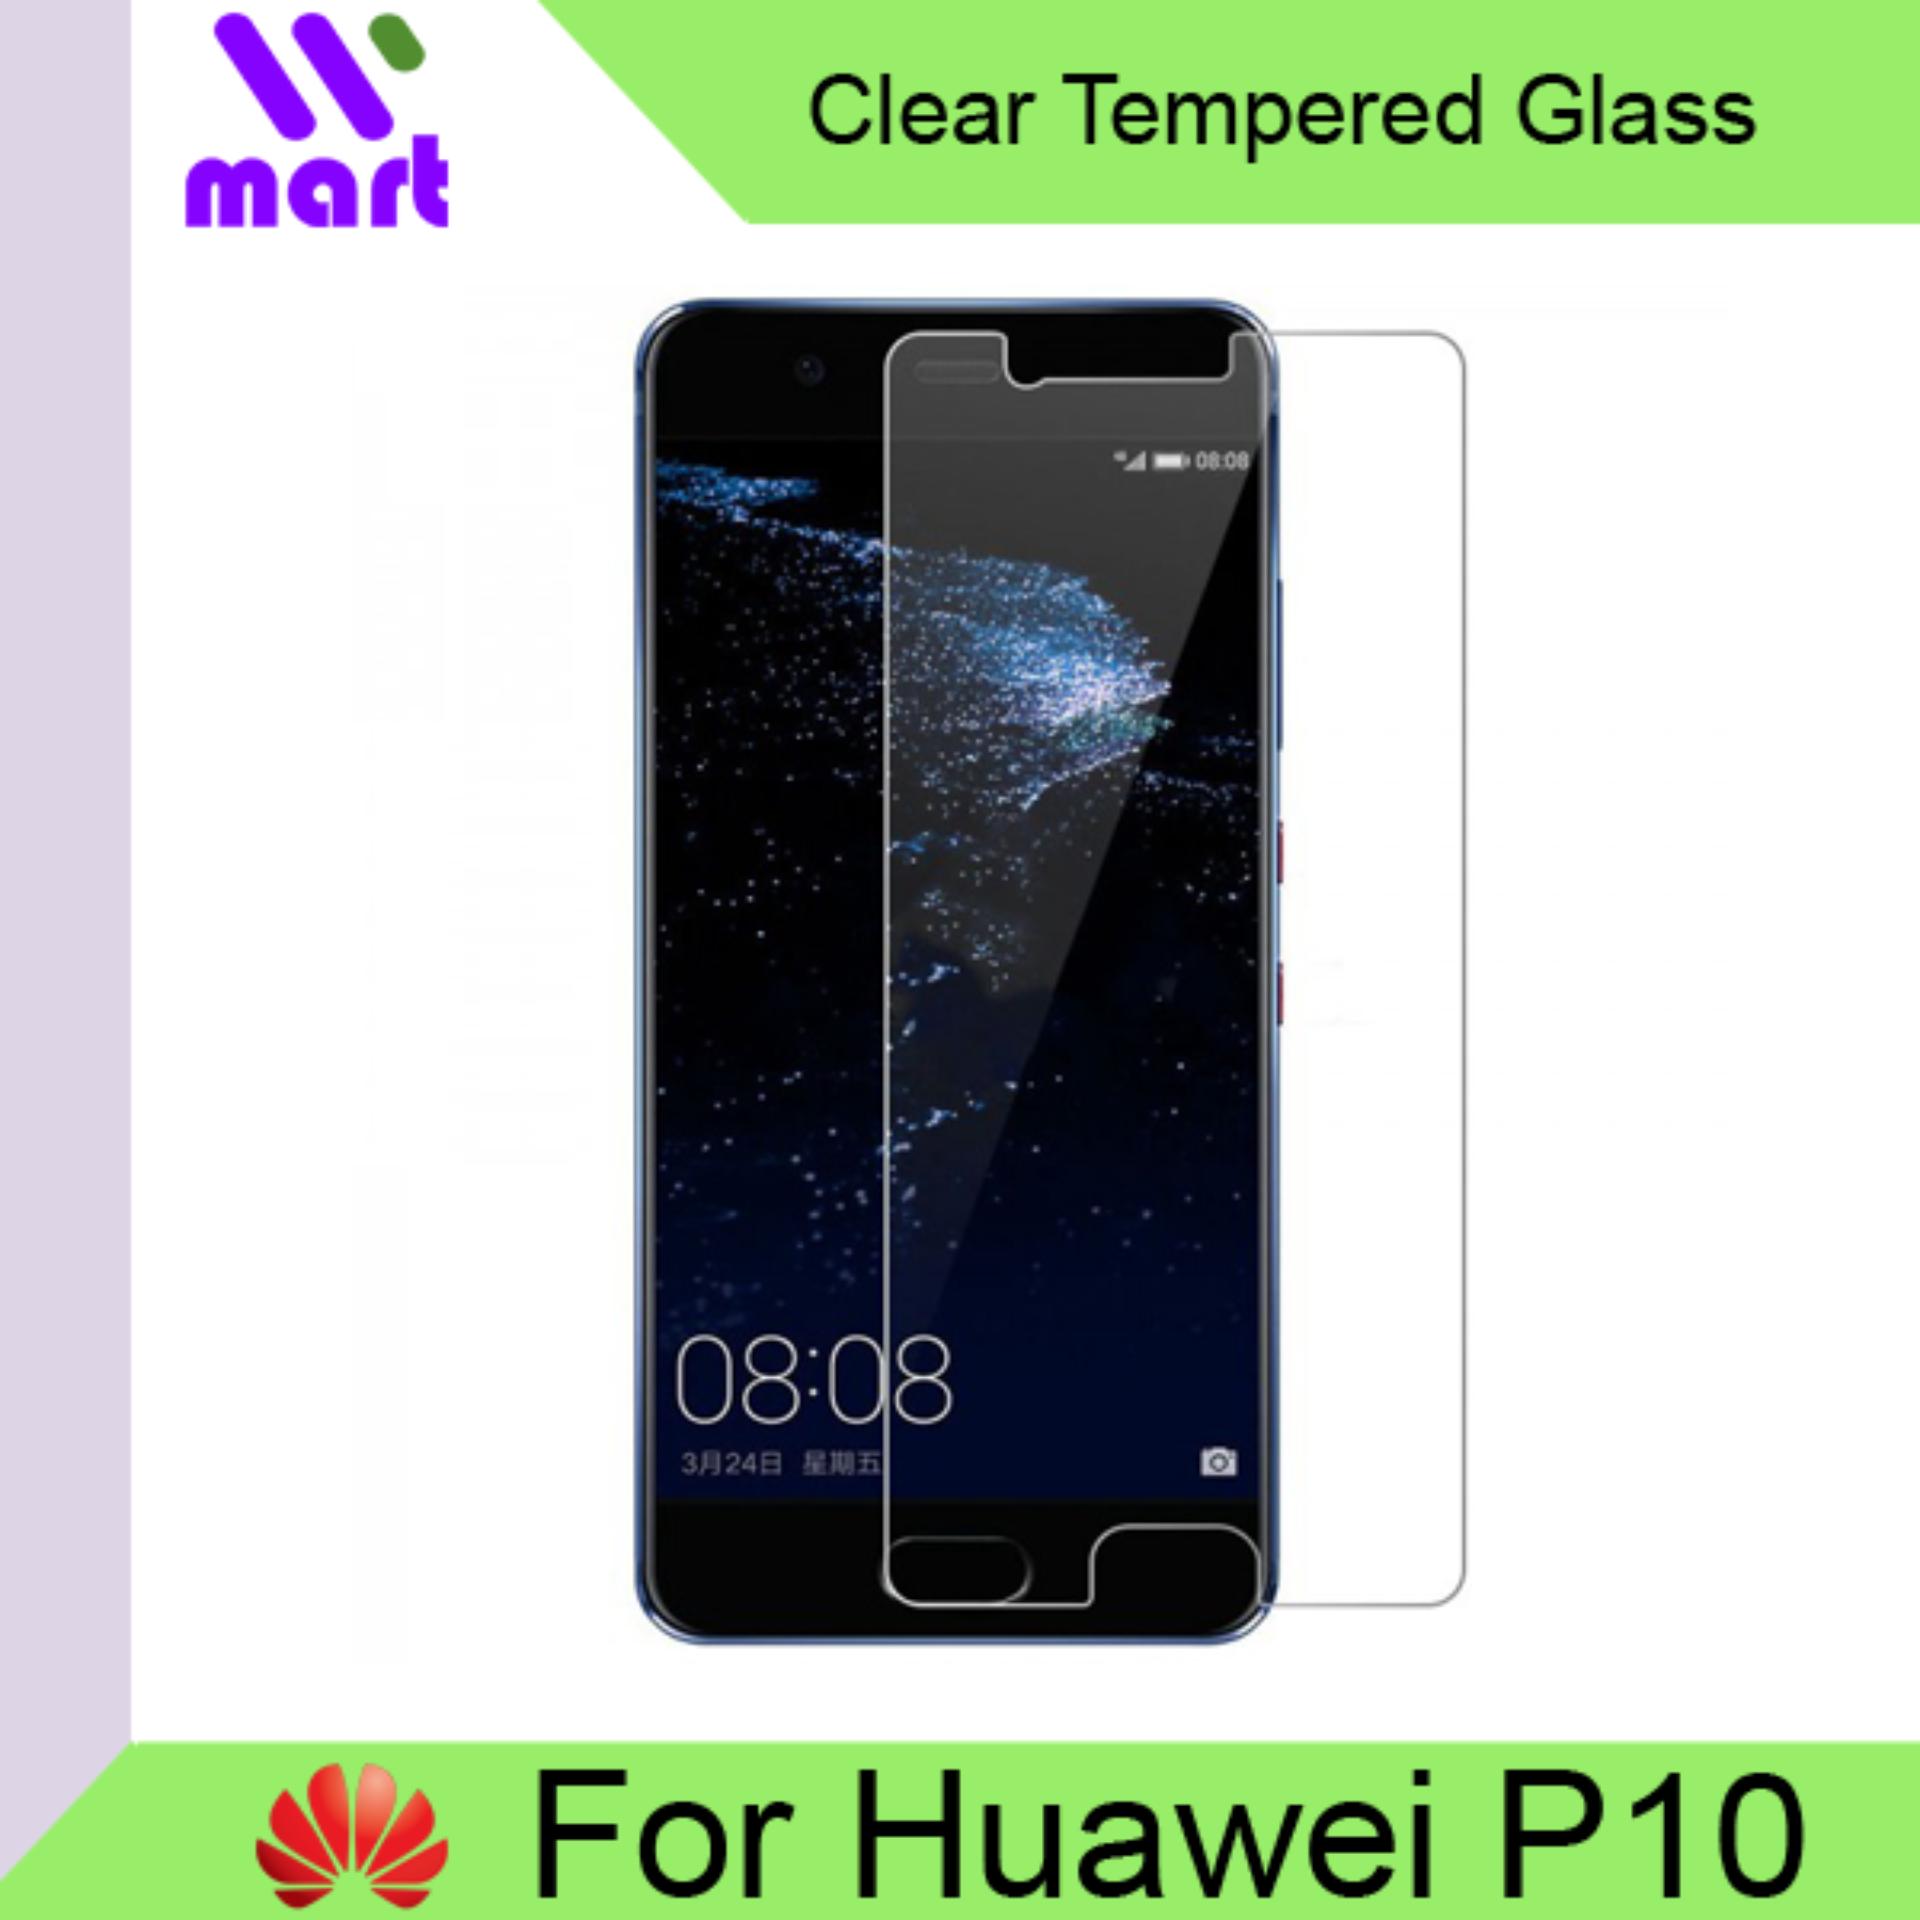 Tempered Glass Screen Protector (Clear) For Huawei P10